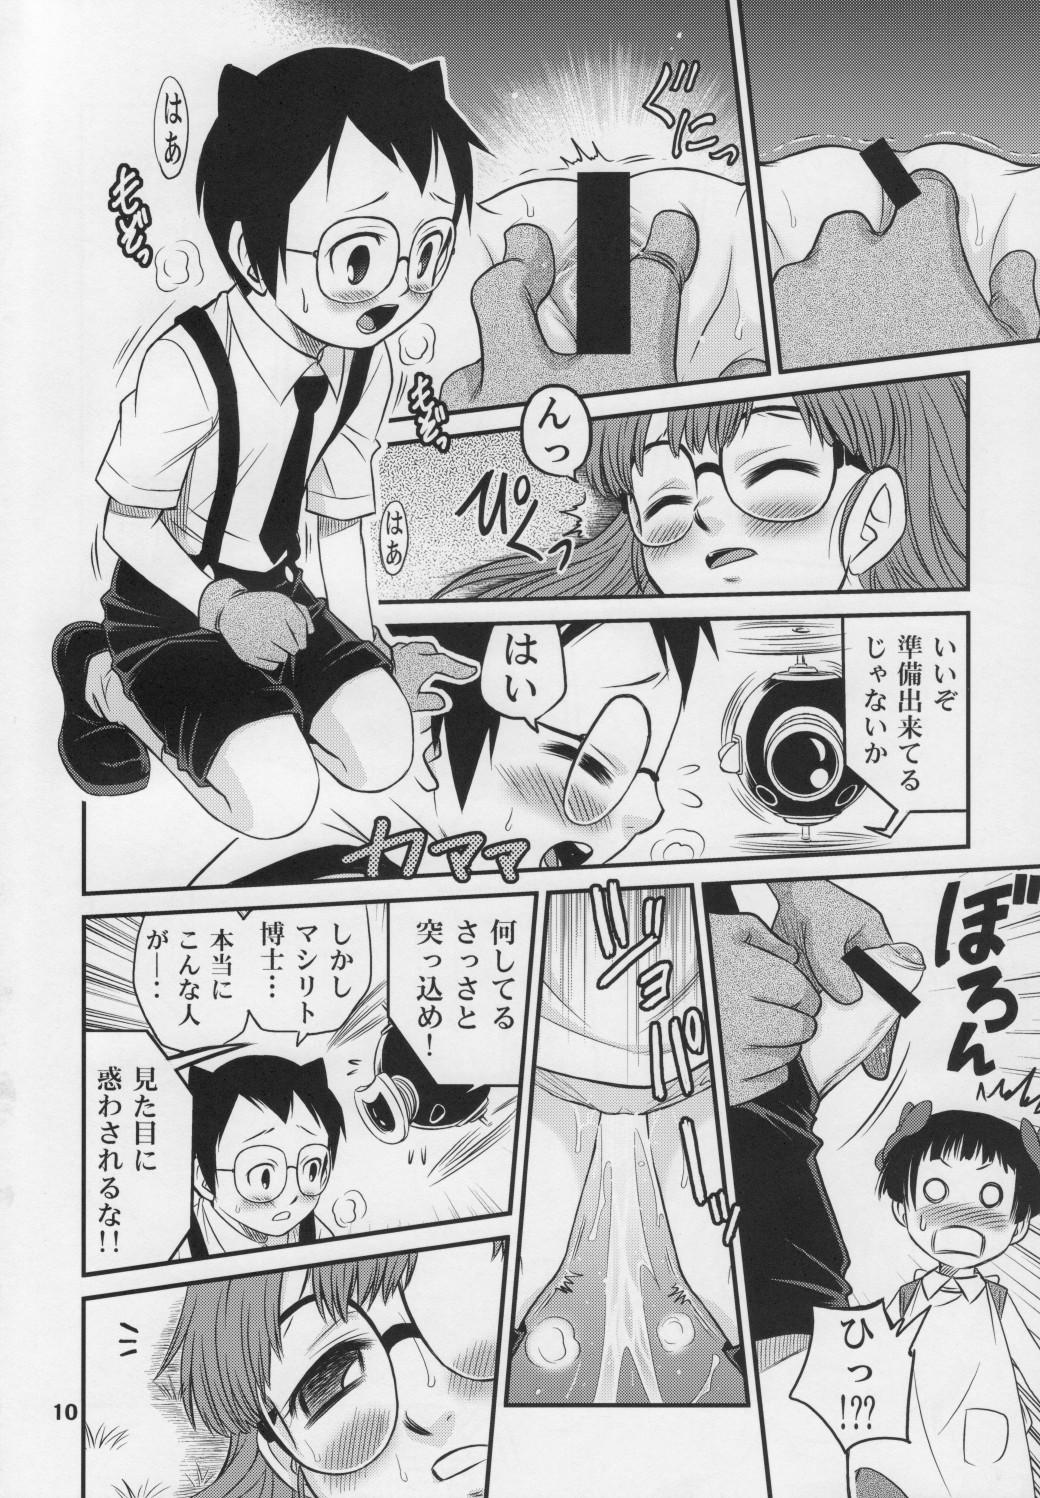 Shemales Project Arale 3 - Dr. slump With - Page 9